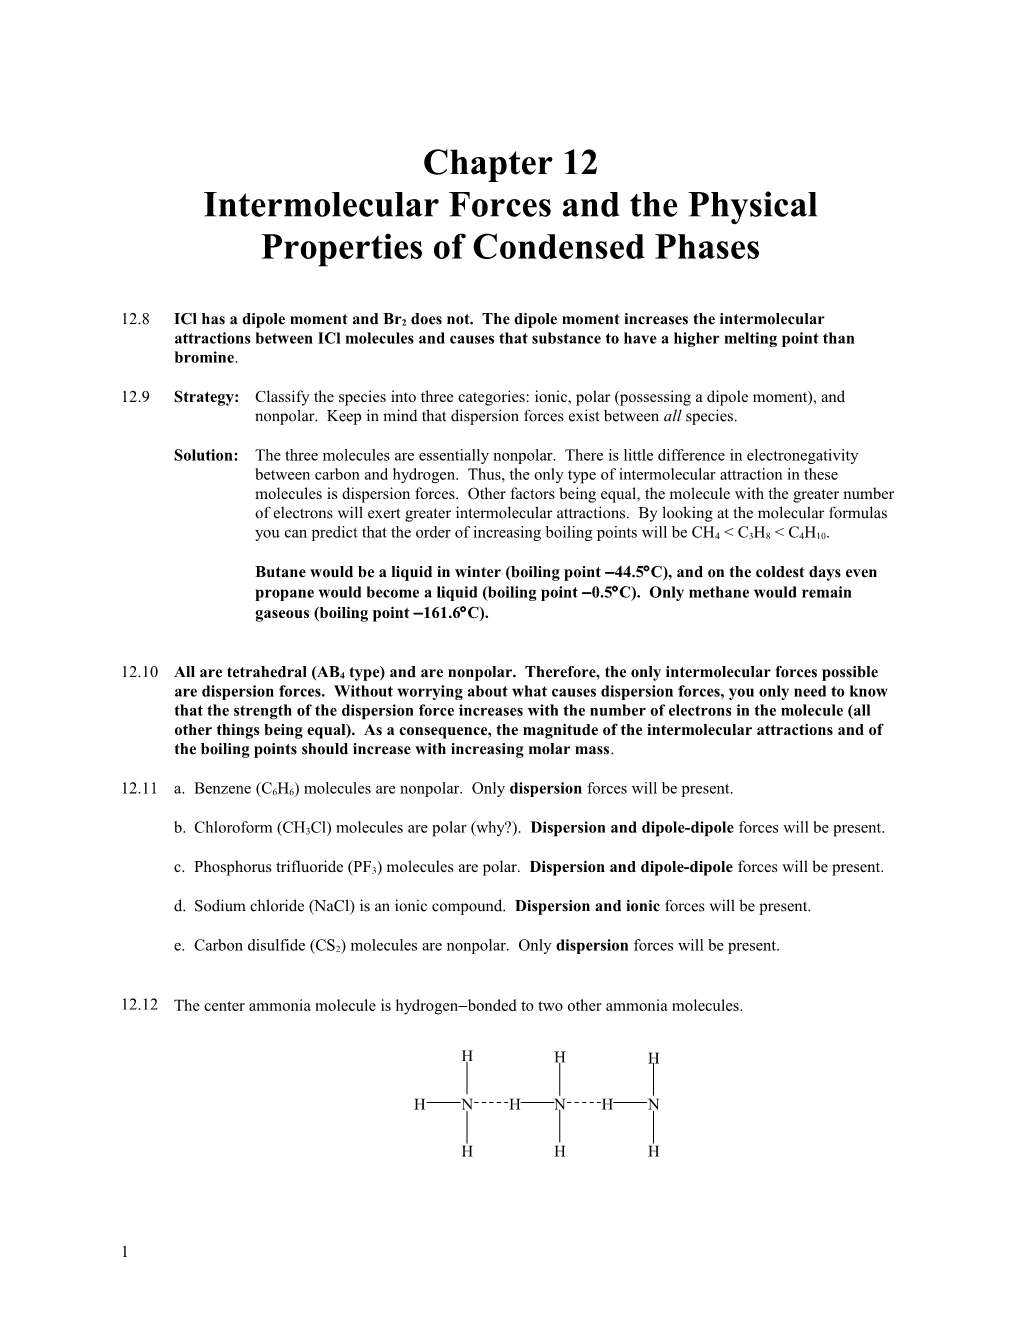 Intermolecular Forces and the Physical Properties of Condensed Phases